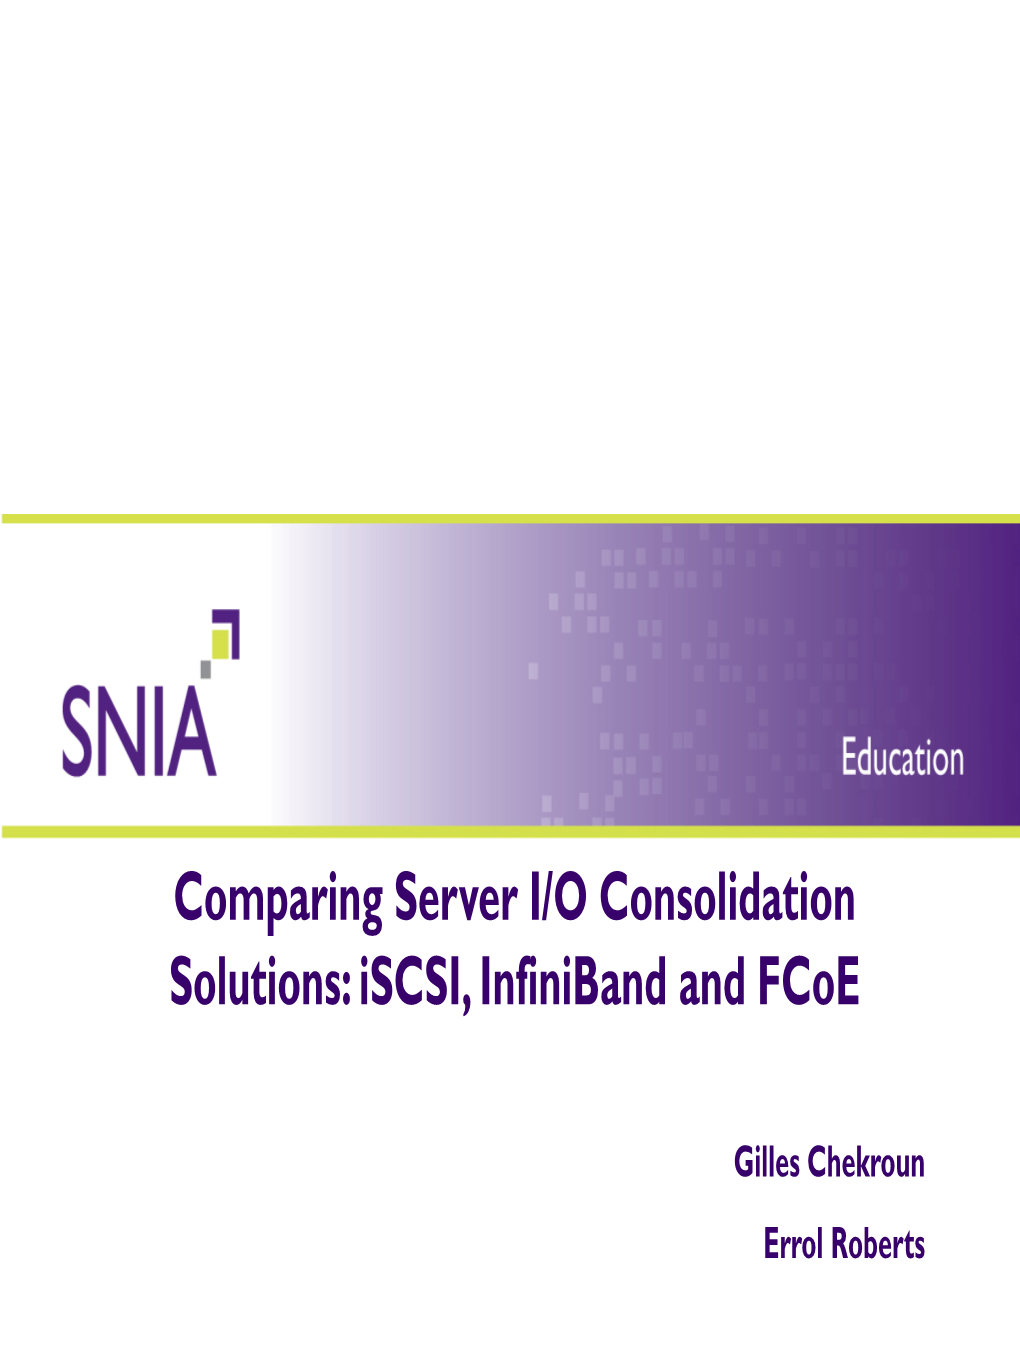 Comparing Server I/O Consolidation Solutions: Iscsi, Infiniband and Fcoe